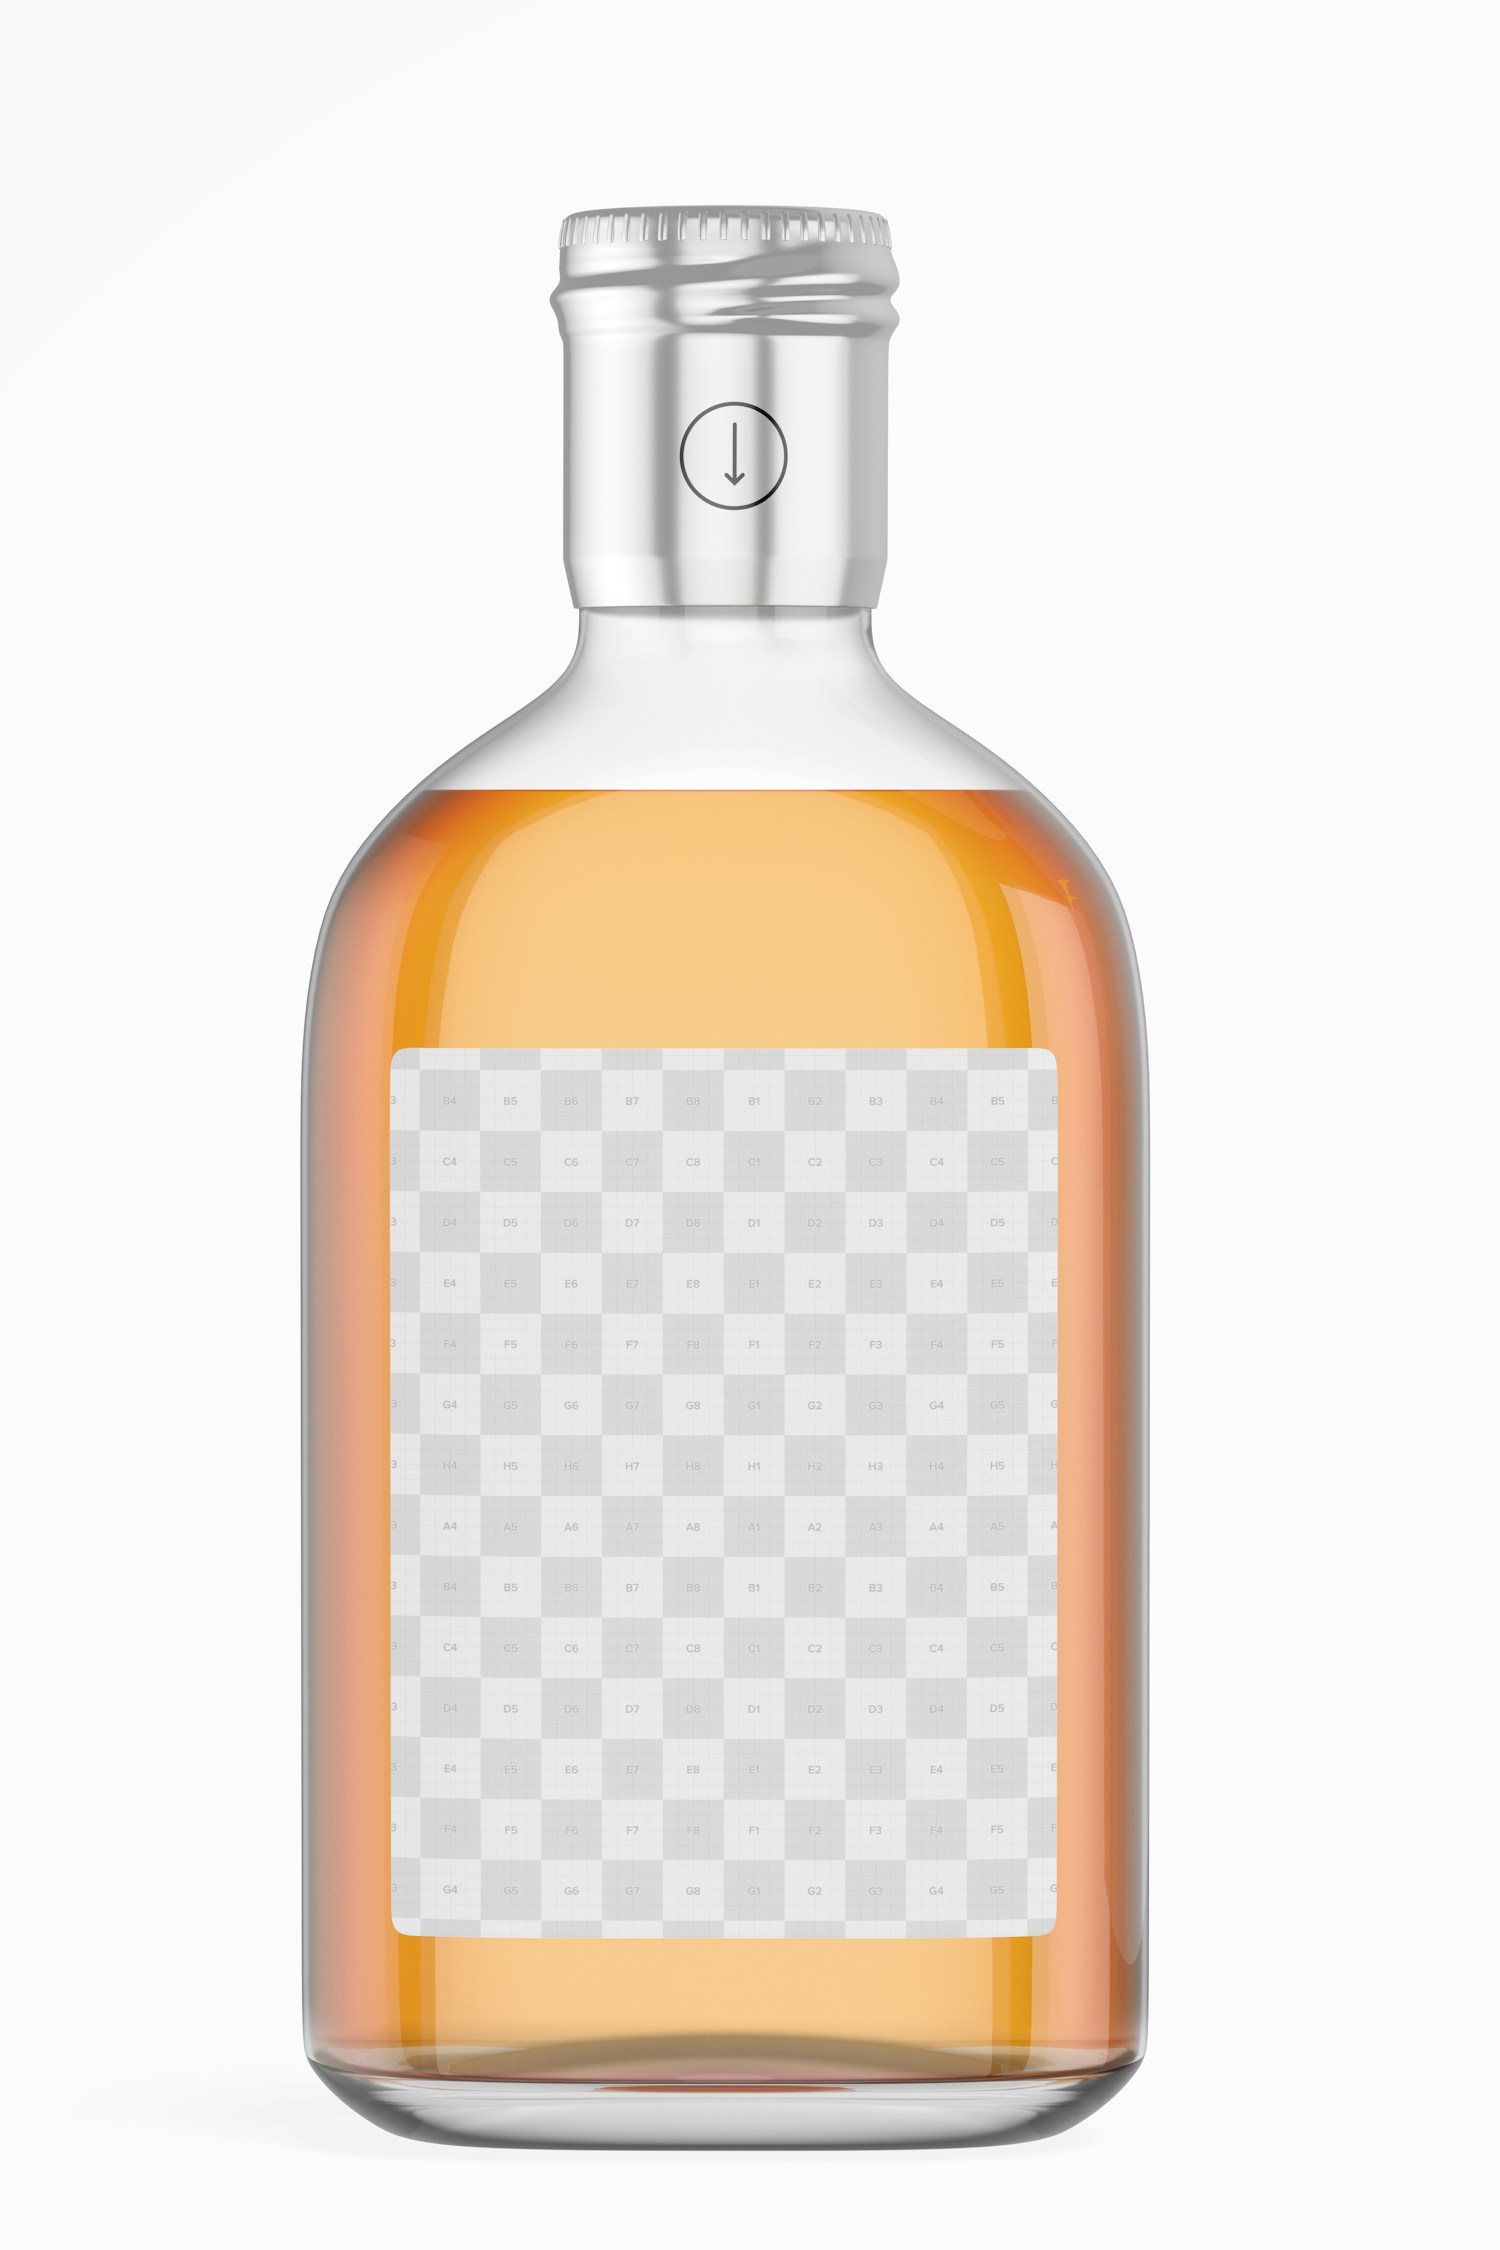 200 ml Whisky Bottle Mockup, Front View